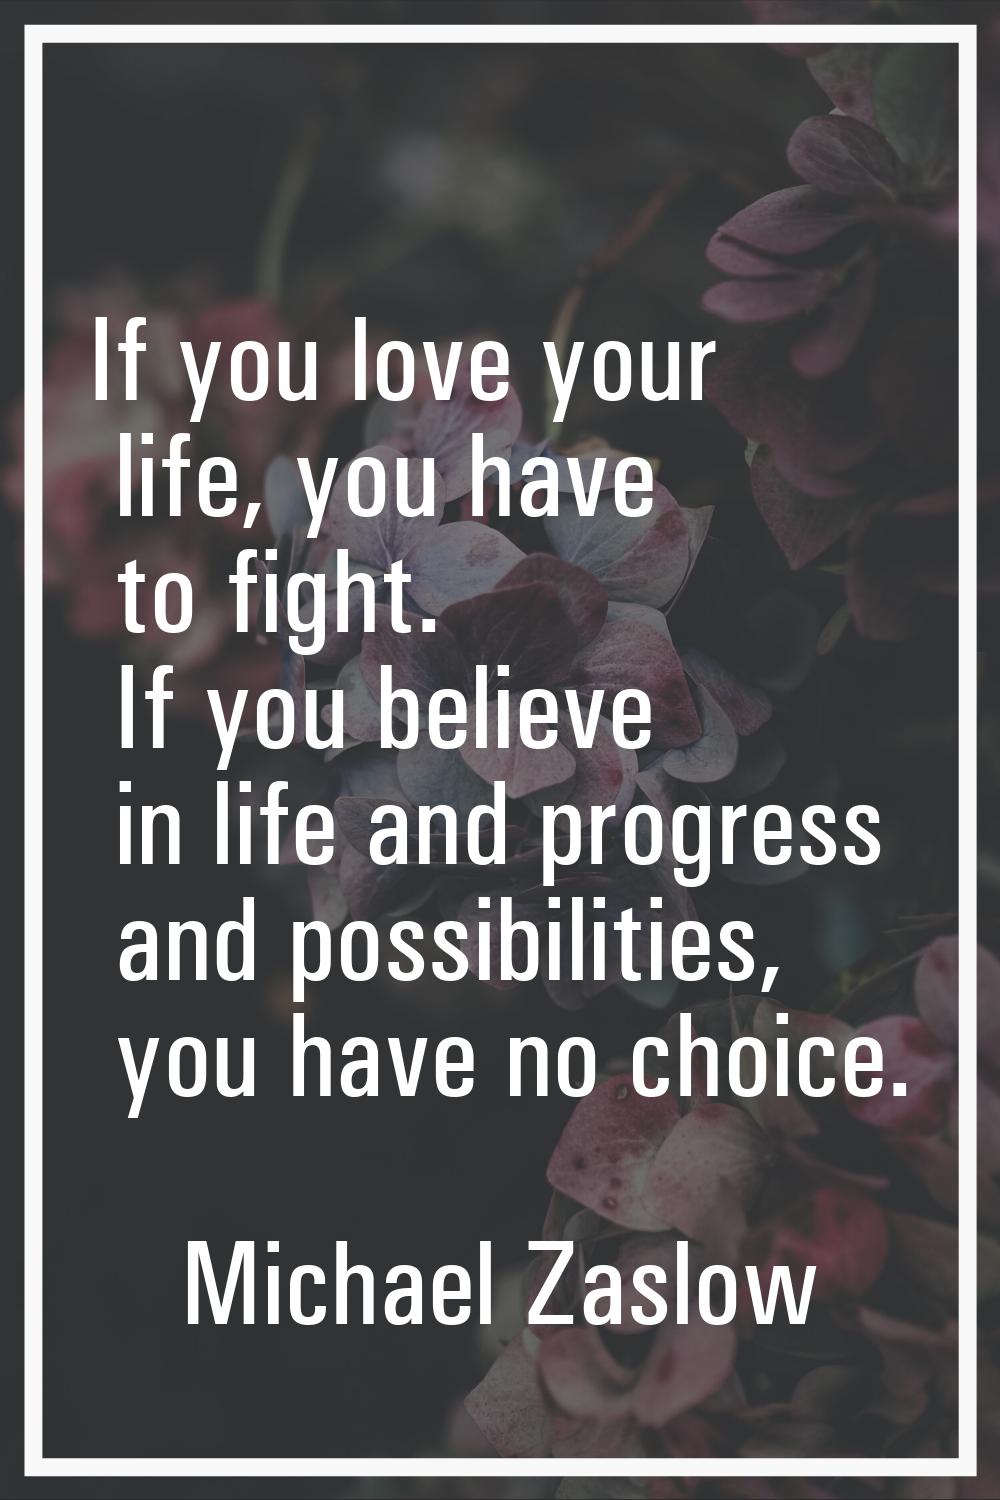 If you love your life, you have to fight. If you believe in life and progress and possibilities, yo